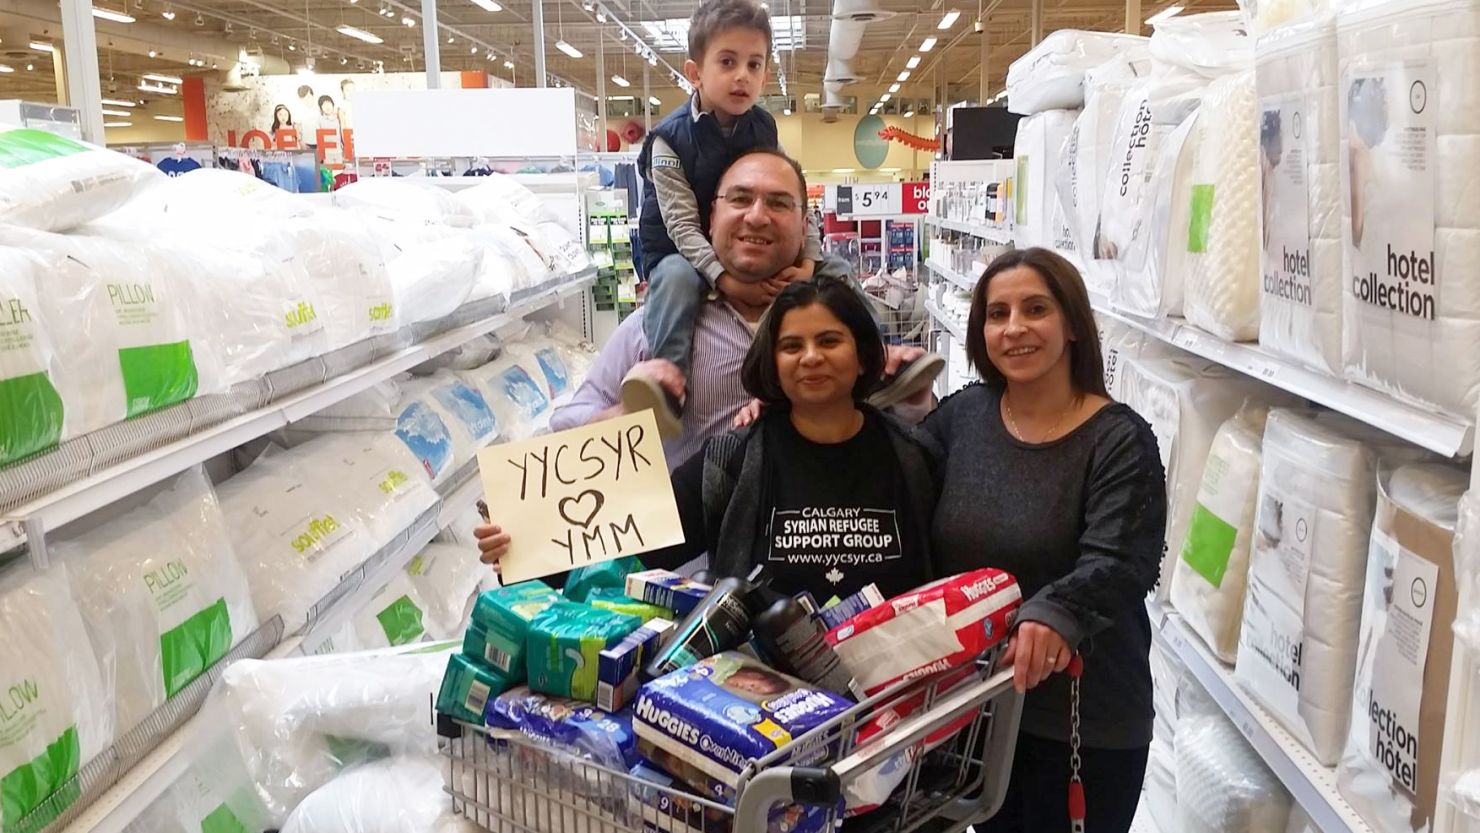 Members of the Syrian Refugee Support Group in Calgary, Alberta, are buying supplies for wildfire evacuees. 